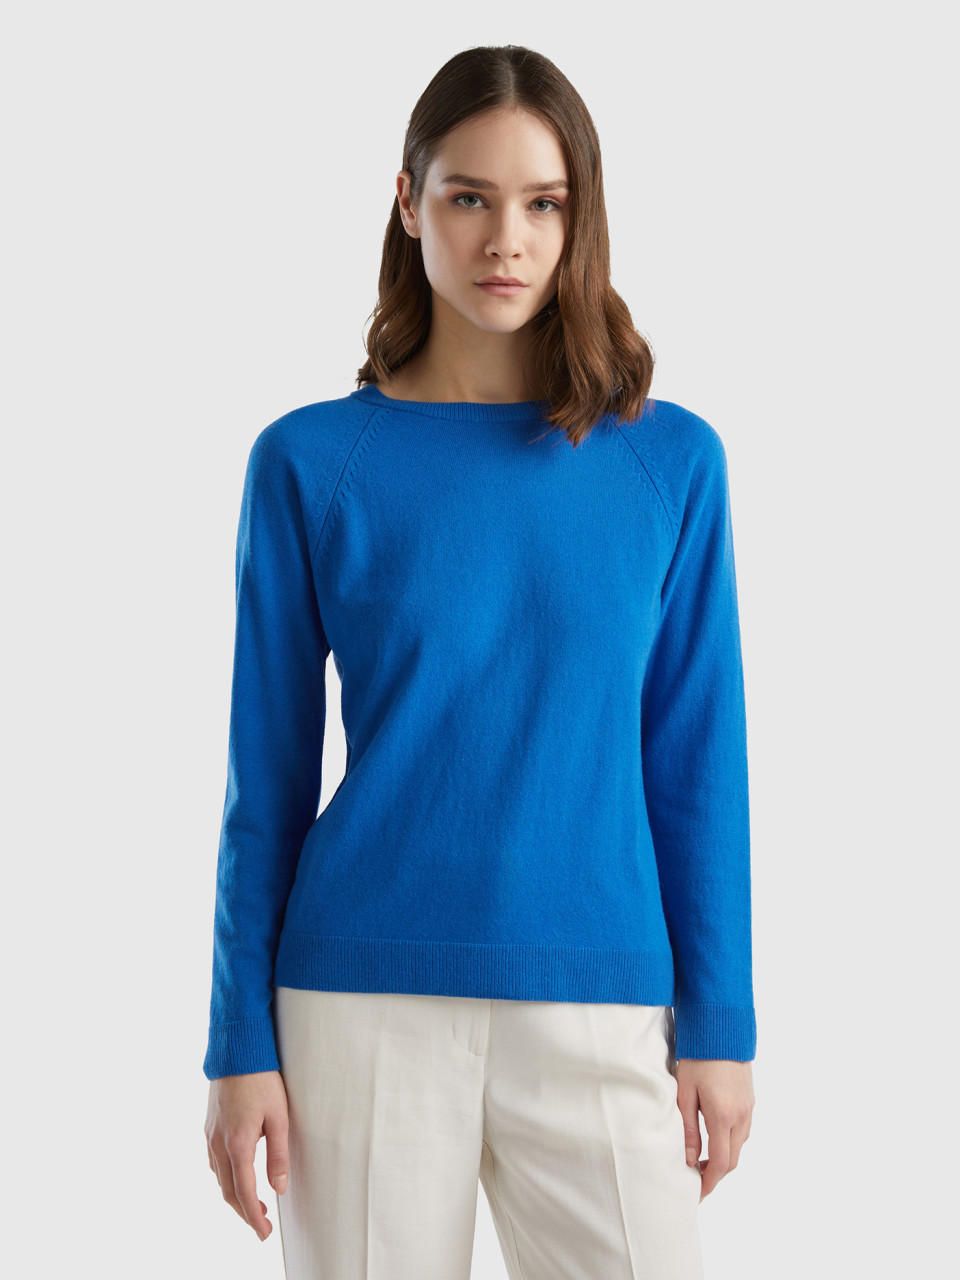 Benetton, Blue Crew Neck Sweater In Cashmere And Wool Blend, Blue, Women